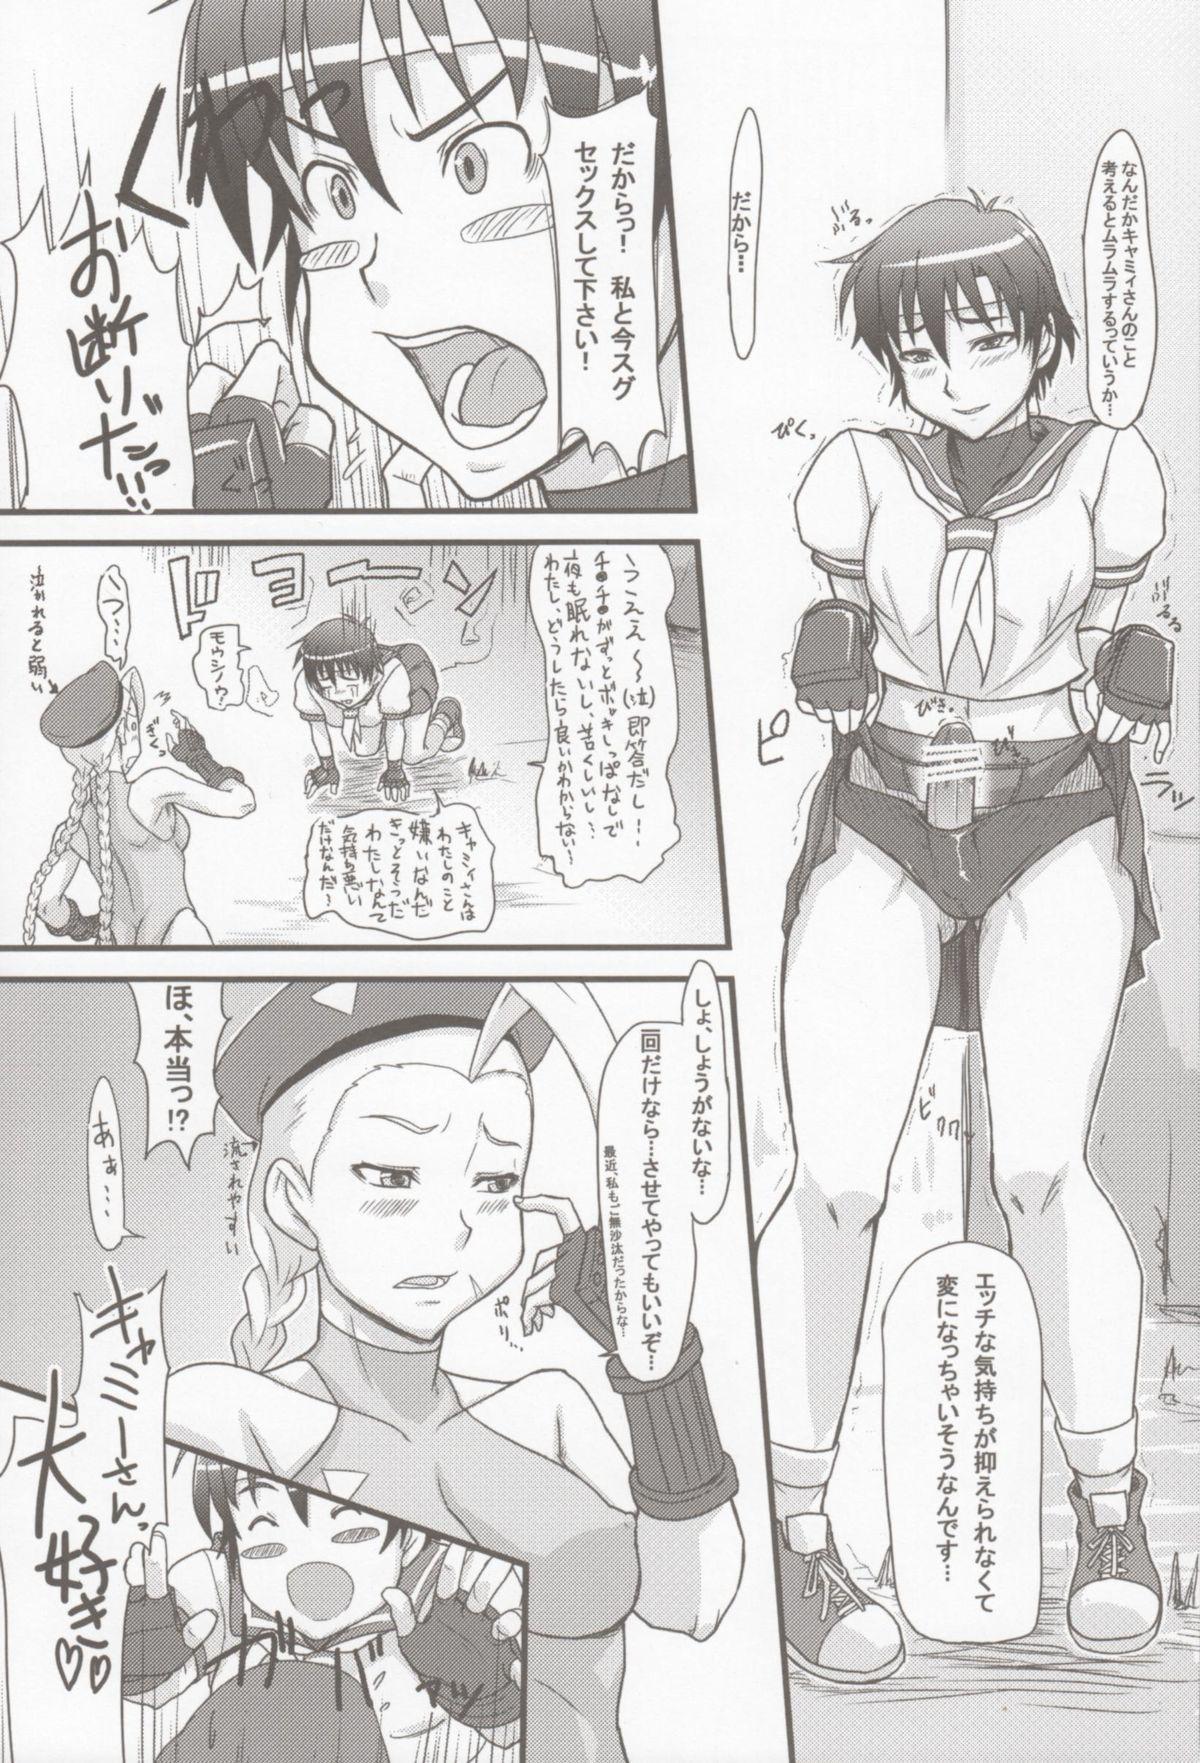 Tribute Cammy Saku! Fighter Material Vol. 2 - Street fighter Caiu Na Net - Page 8